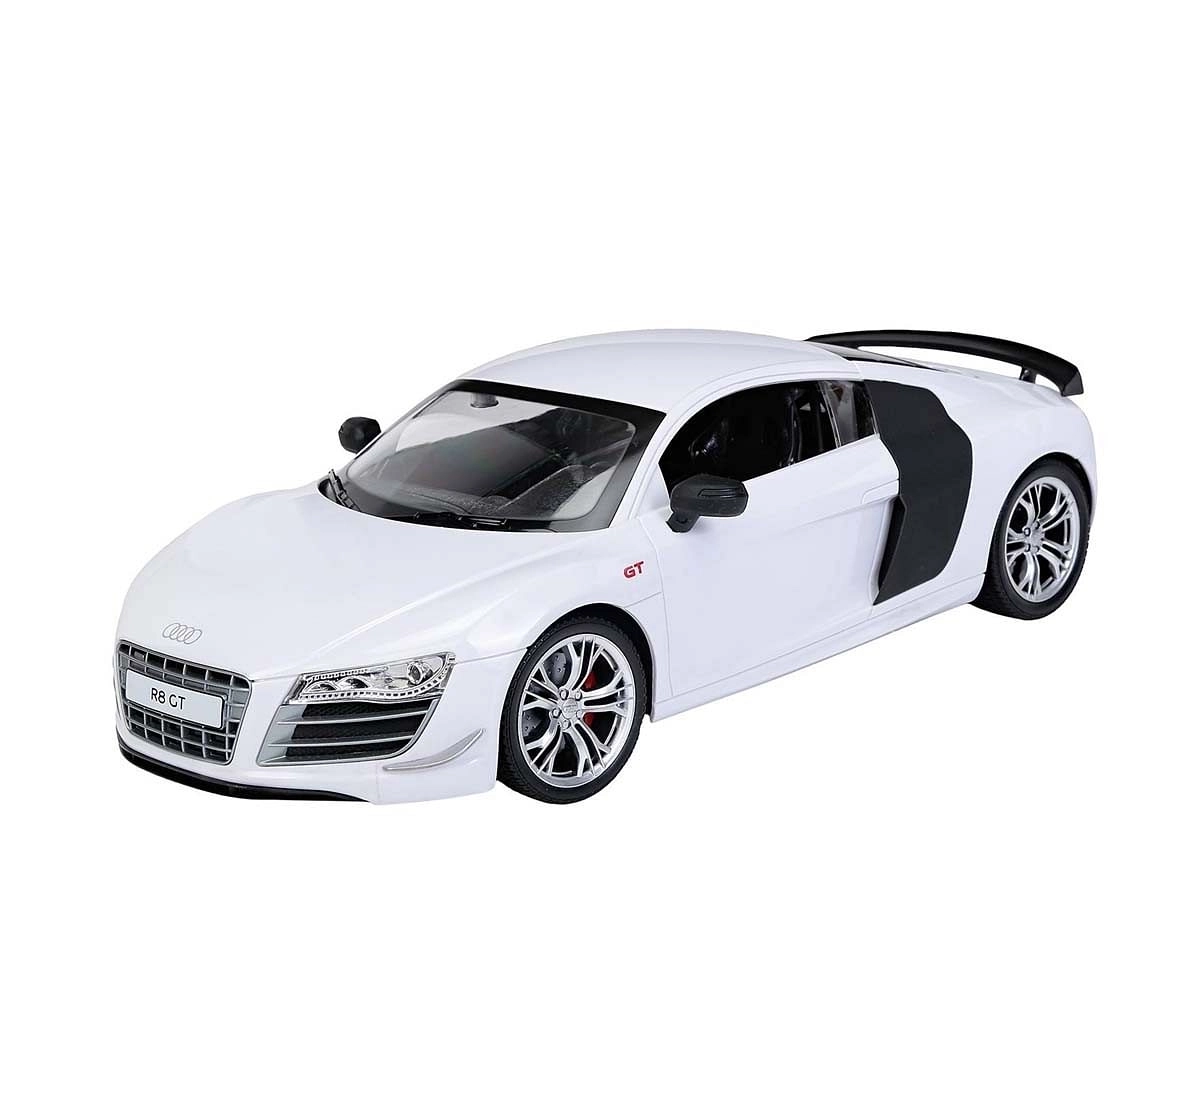 Rowan 1:14 Audi R8 Gt with Remote Control Toys for Kids age 6Y+ 